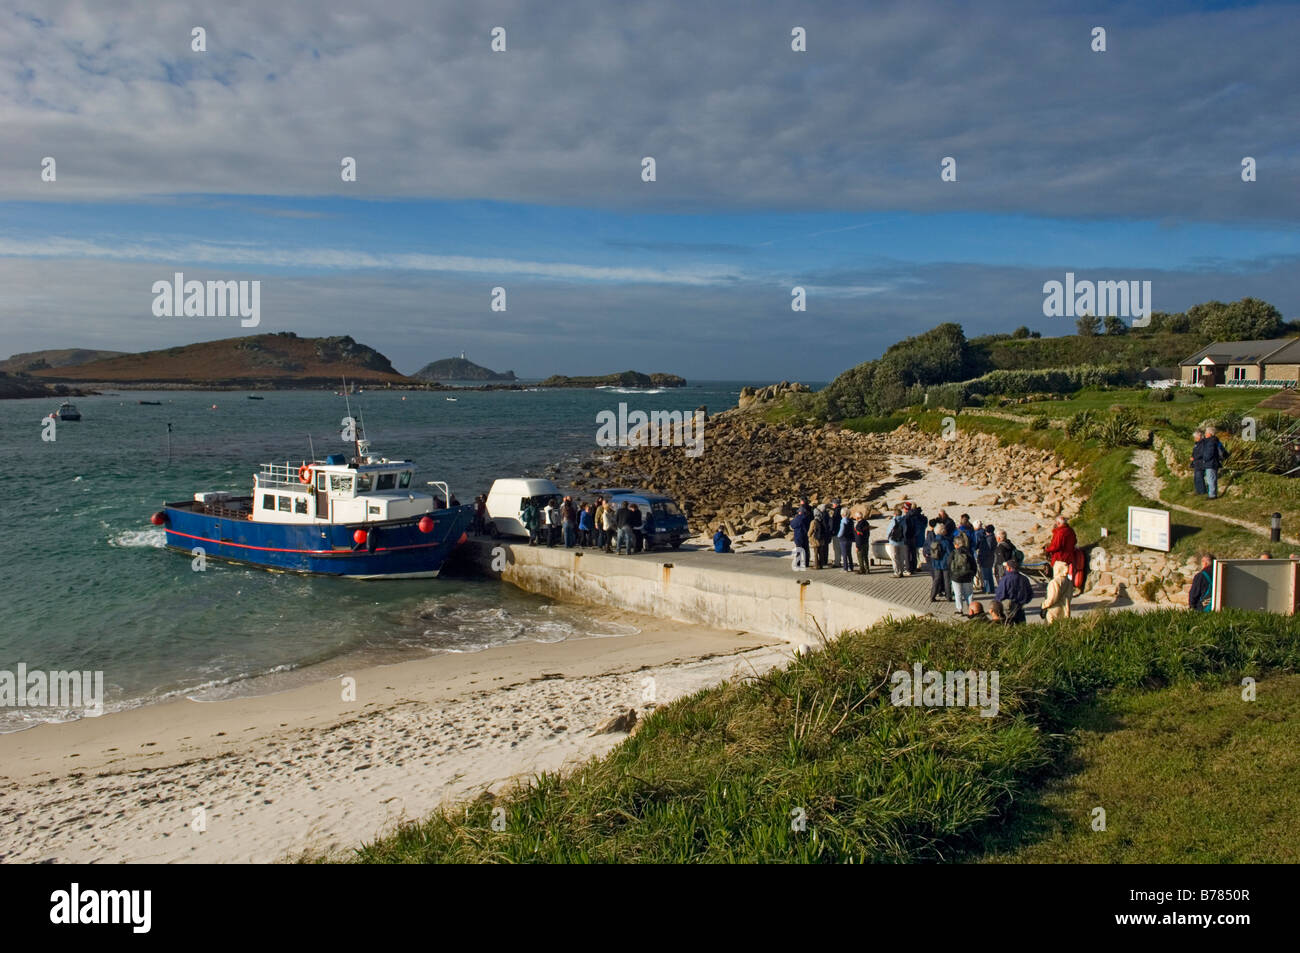 Queuing tourists boarding the Island ferry. Lower Town Quay, St Martin's, The Isles of Scilly, Cornwall, England, UK Stock Photo